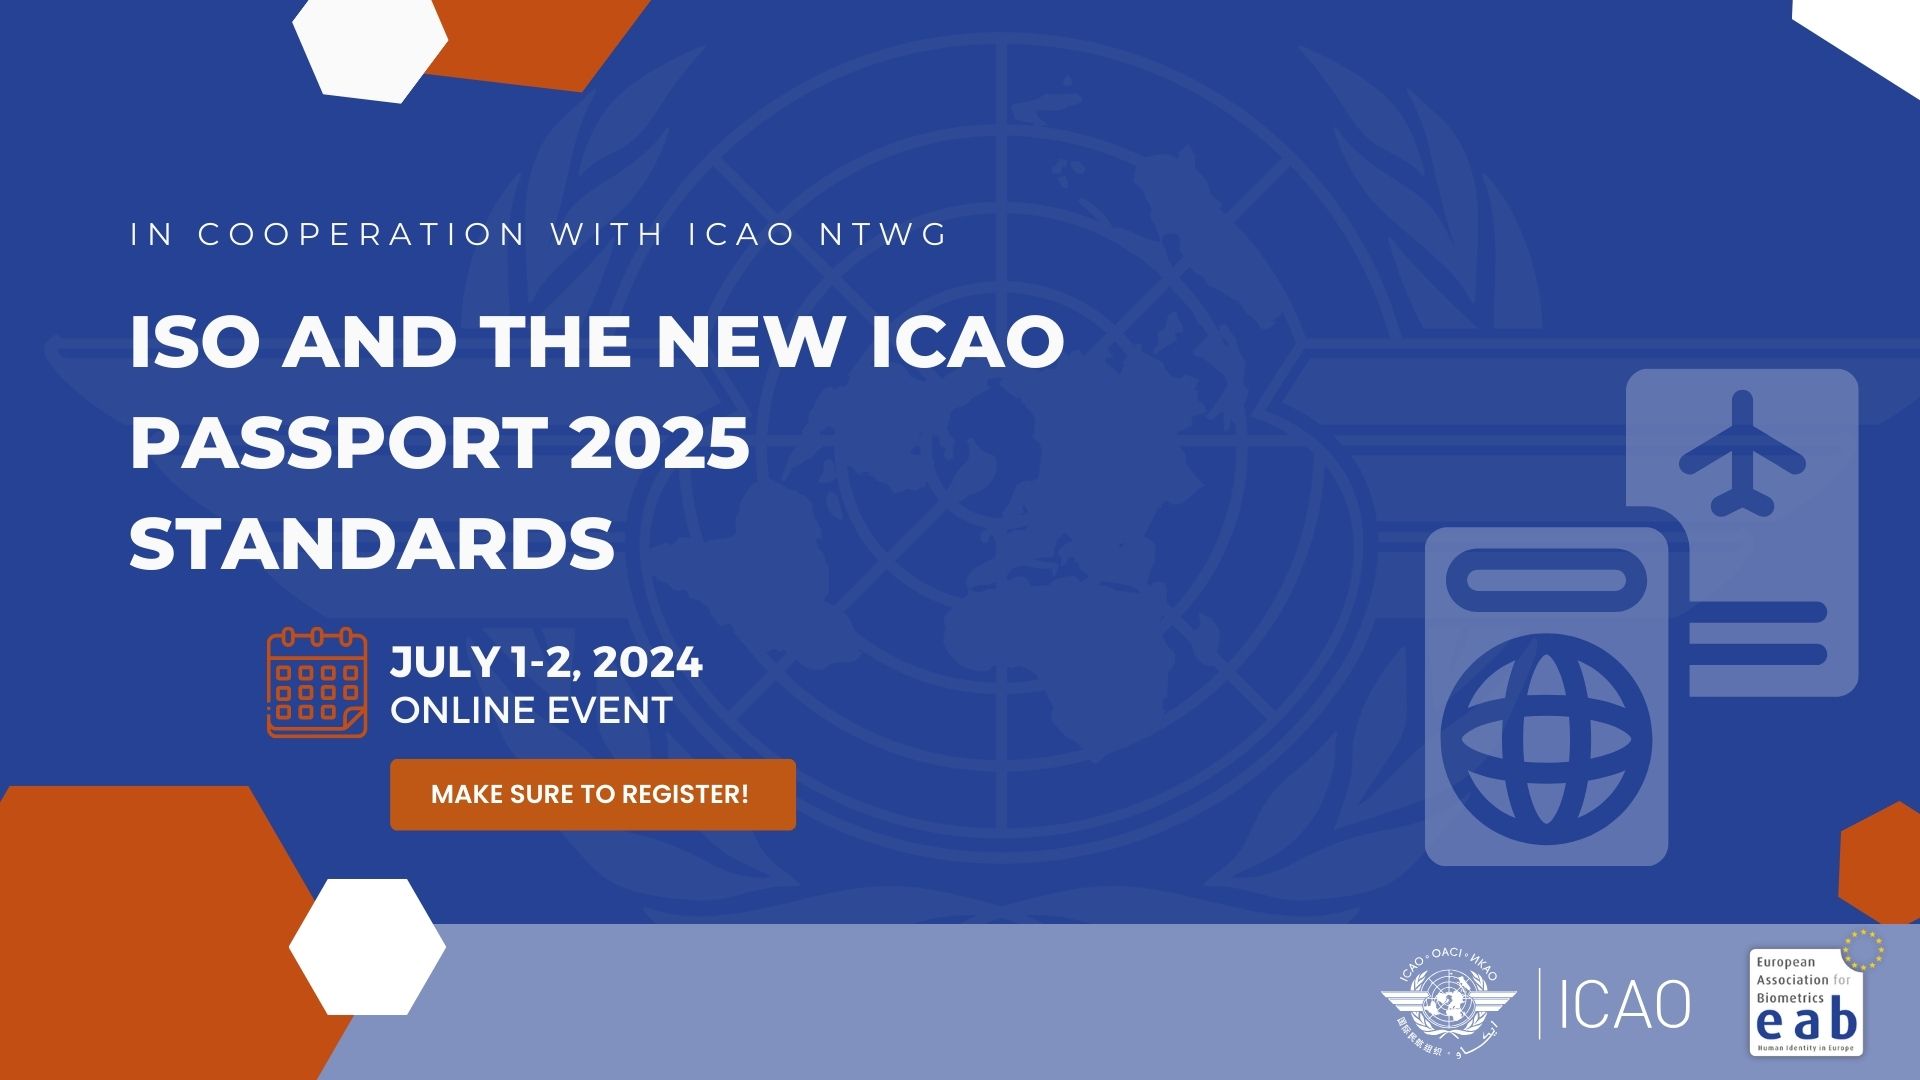 [Illustration] Banner on Online Event - ISO and the New ICAO Passport 2025 Standards